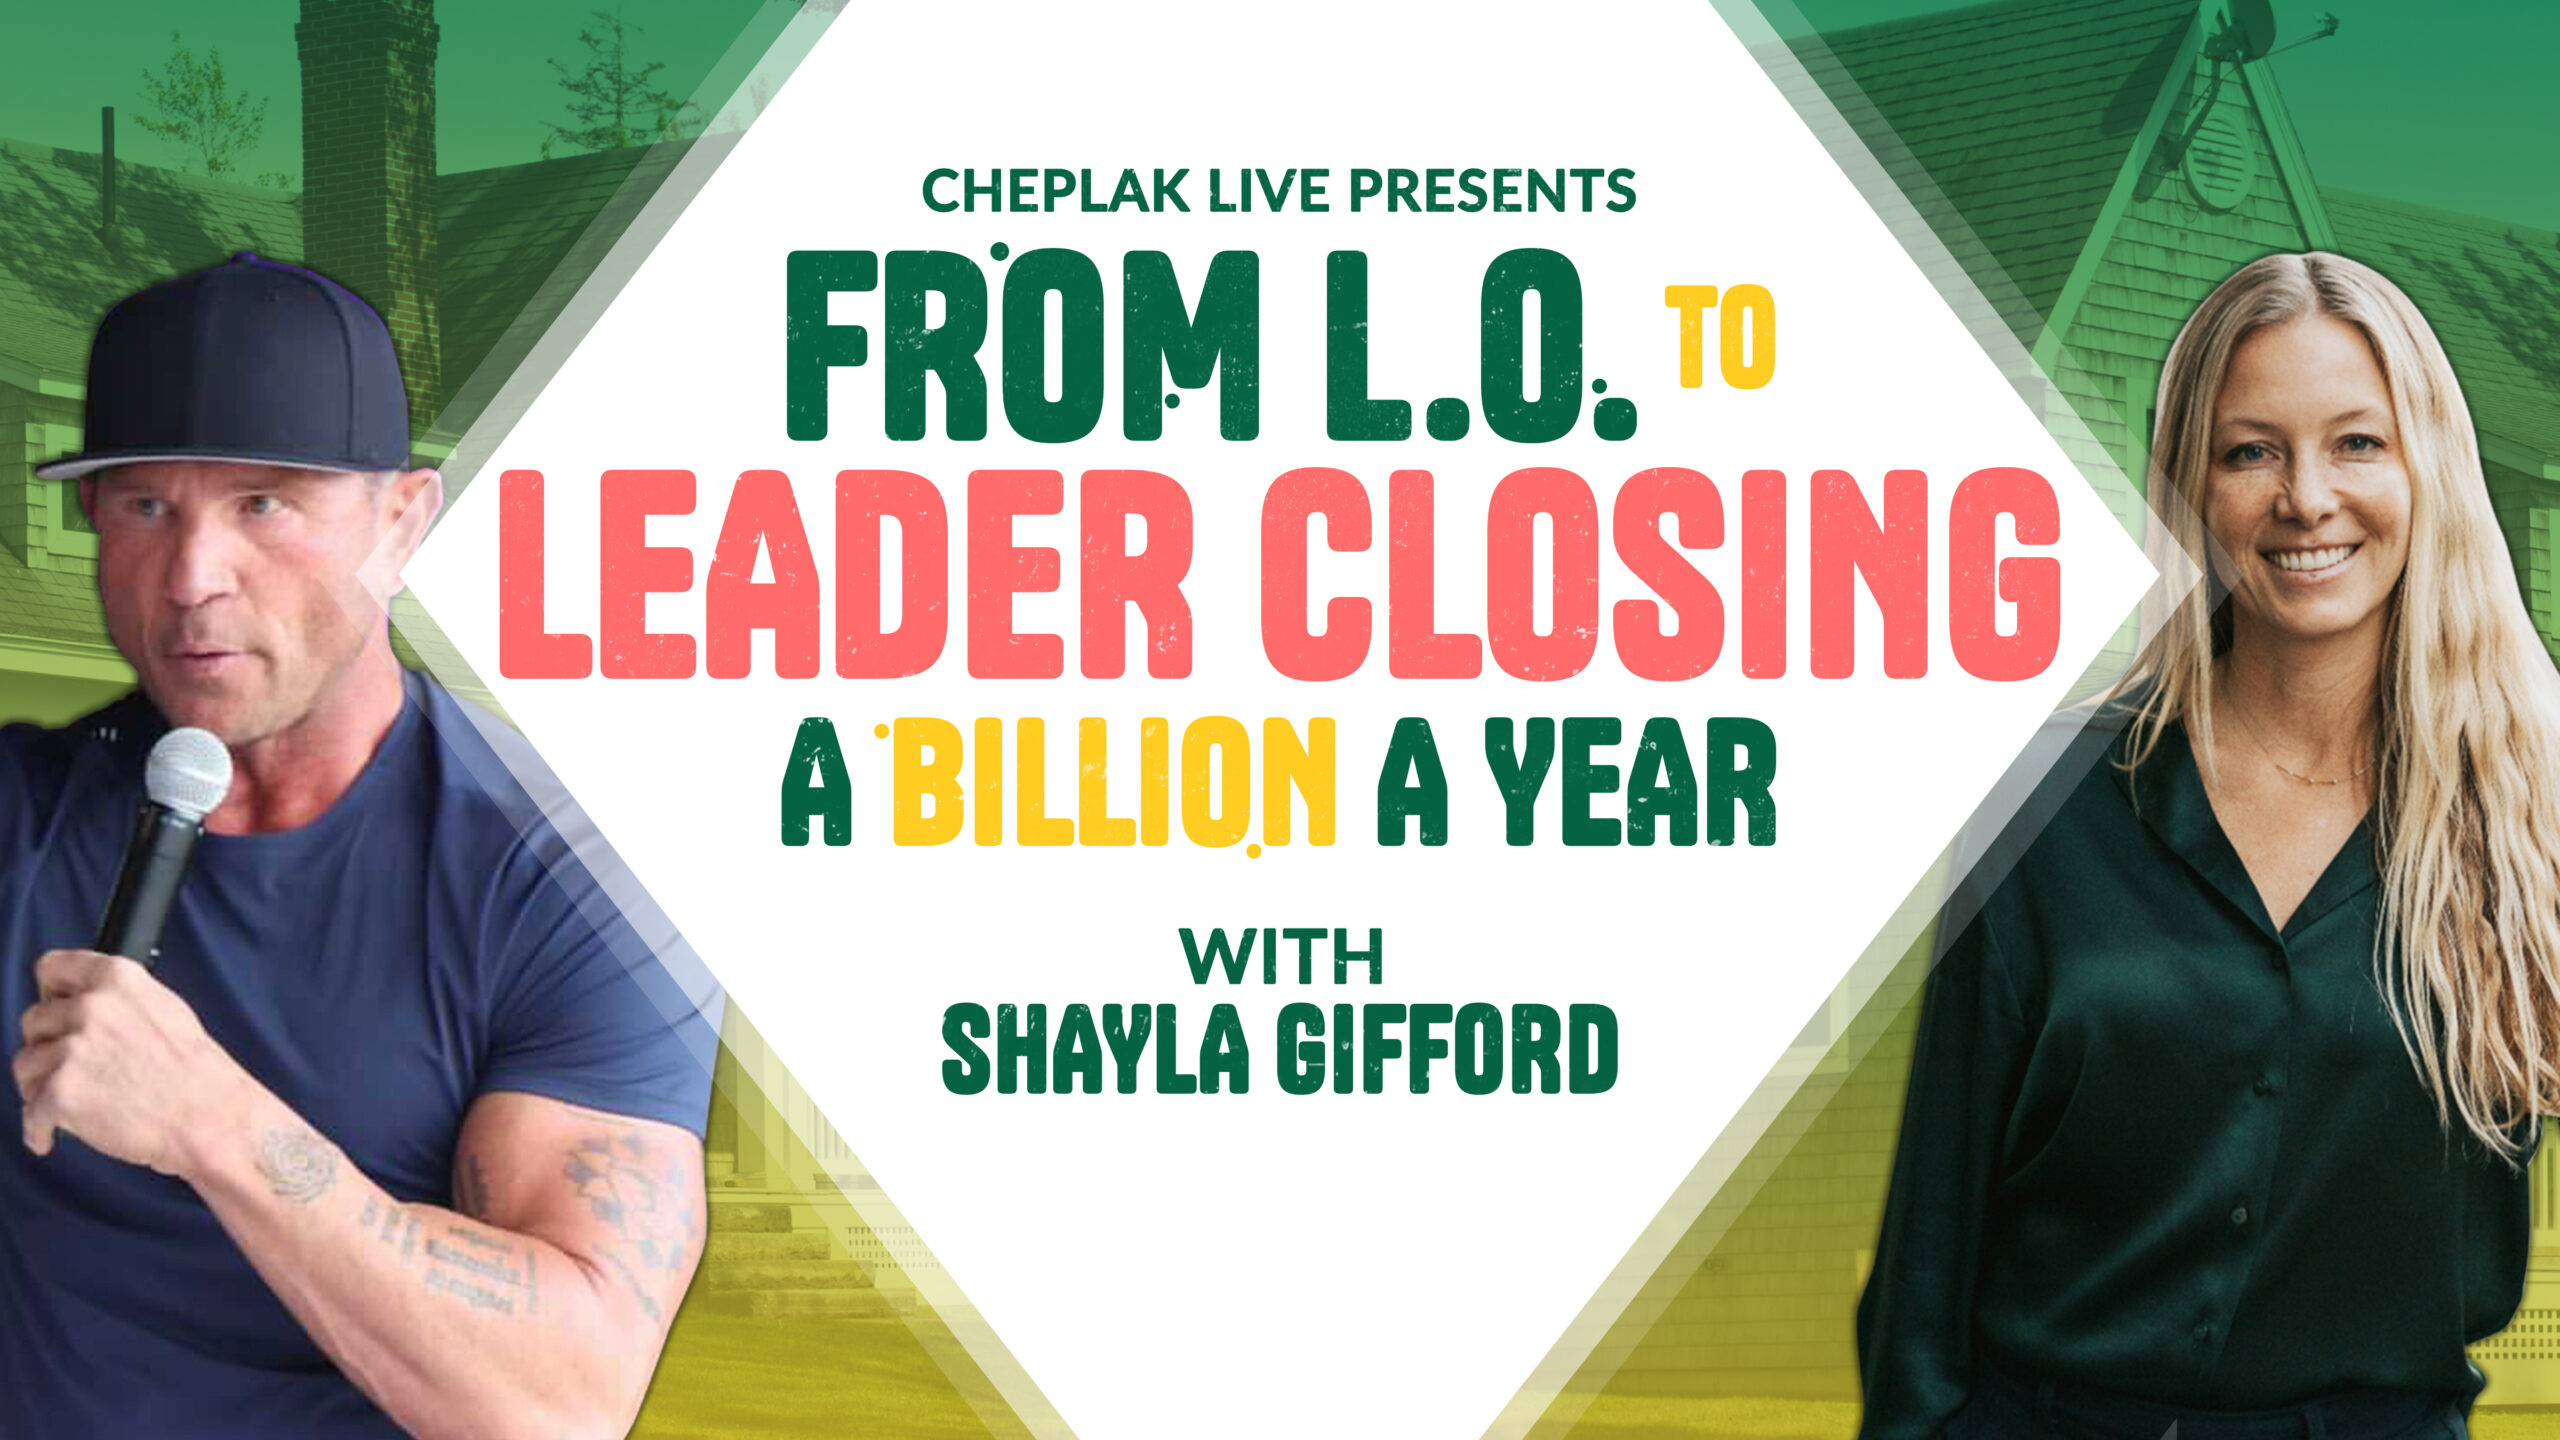 From L.O. to Leader Closing A Billion A Year